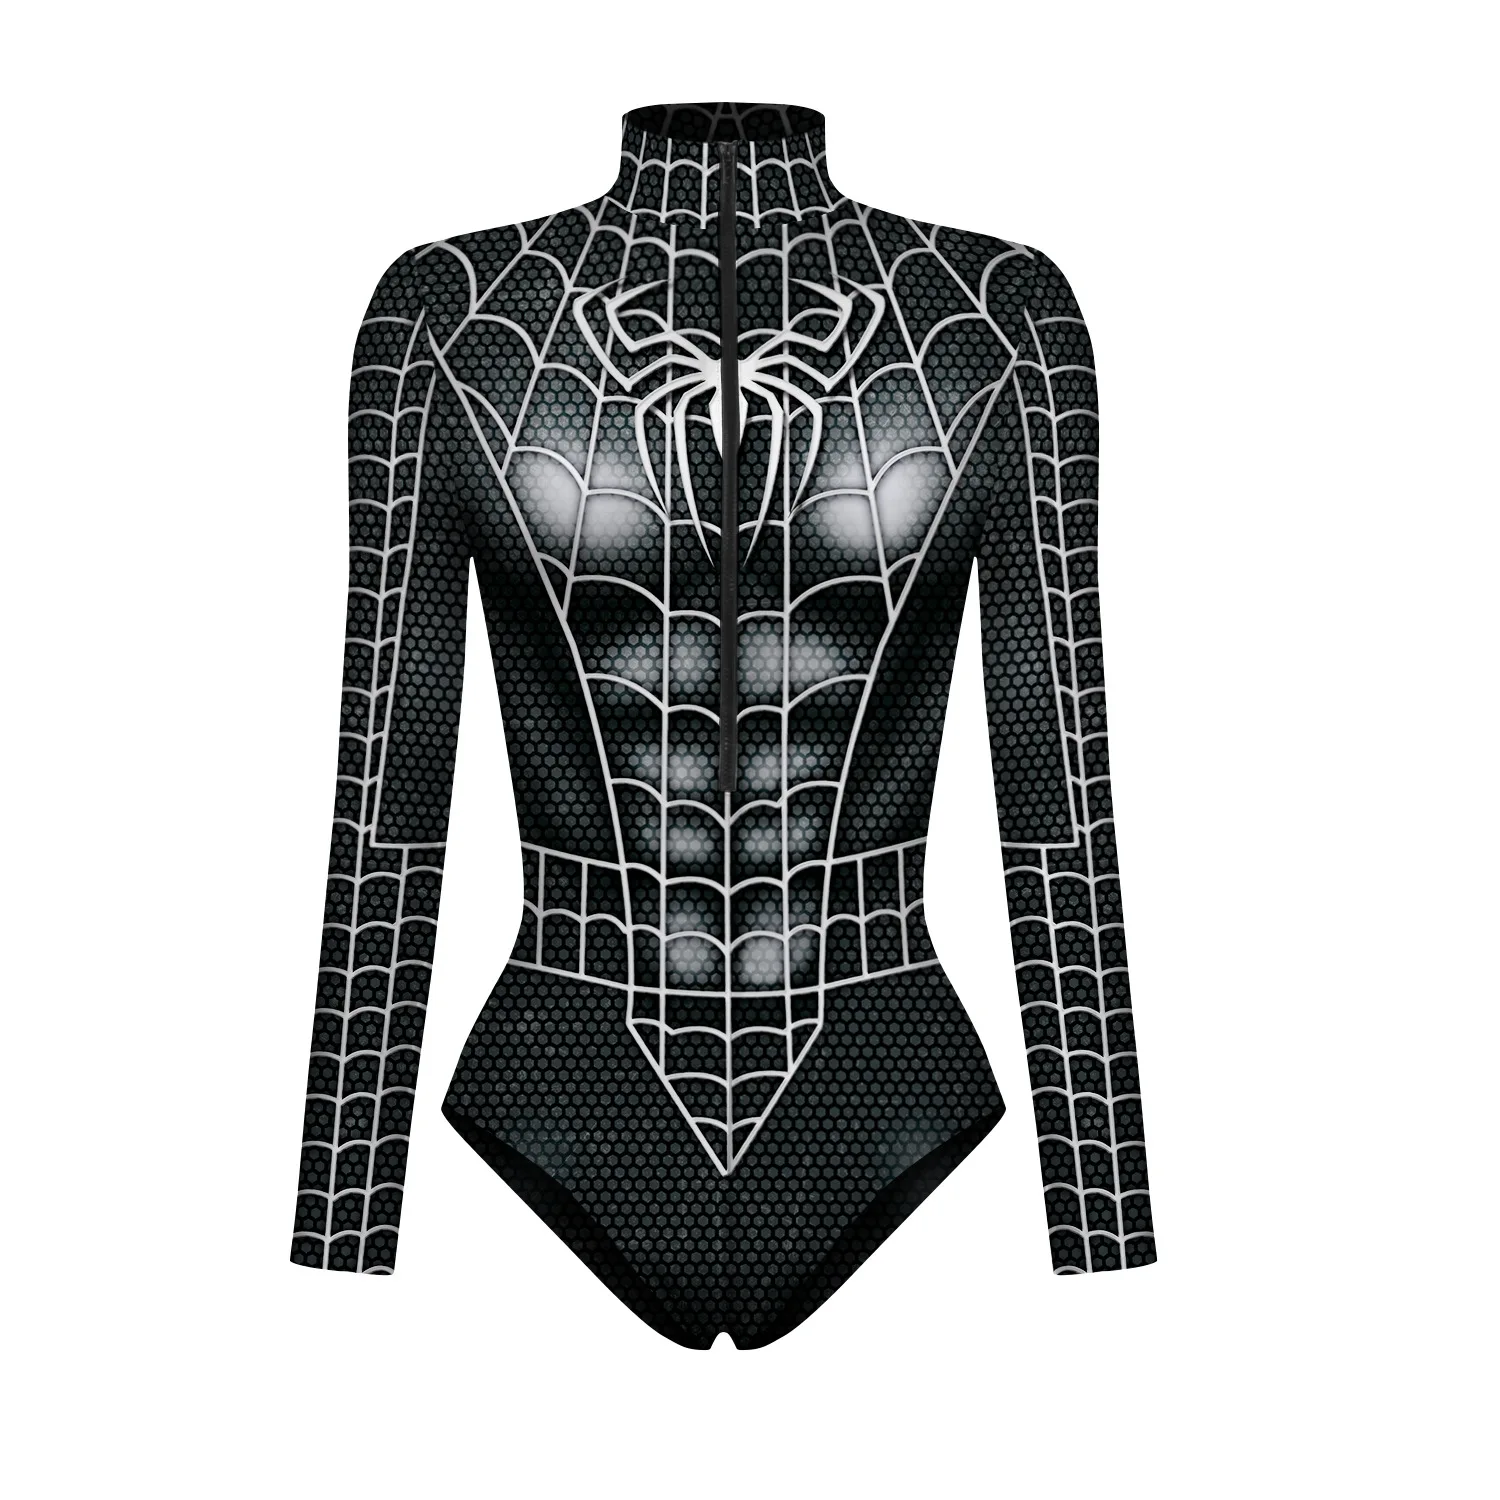 Ladies Jumpsuit Halloween Clothing Halloween Clothing Is Fashionable and Sexy Tight Spider Web Mechanical Digital Printing Women